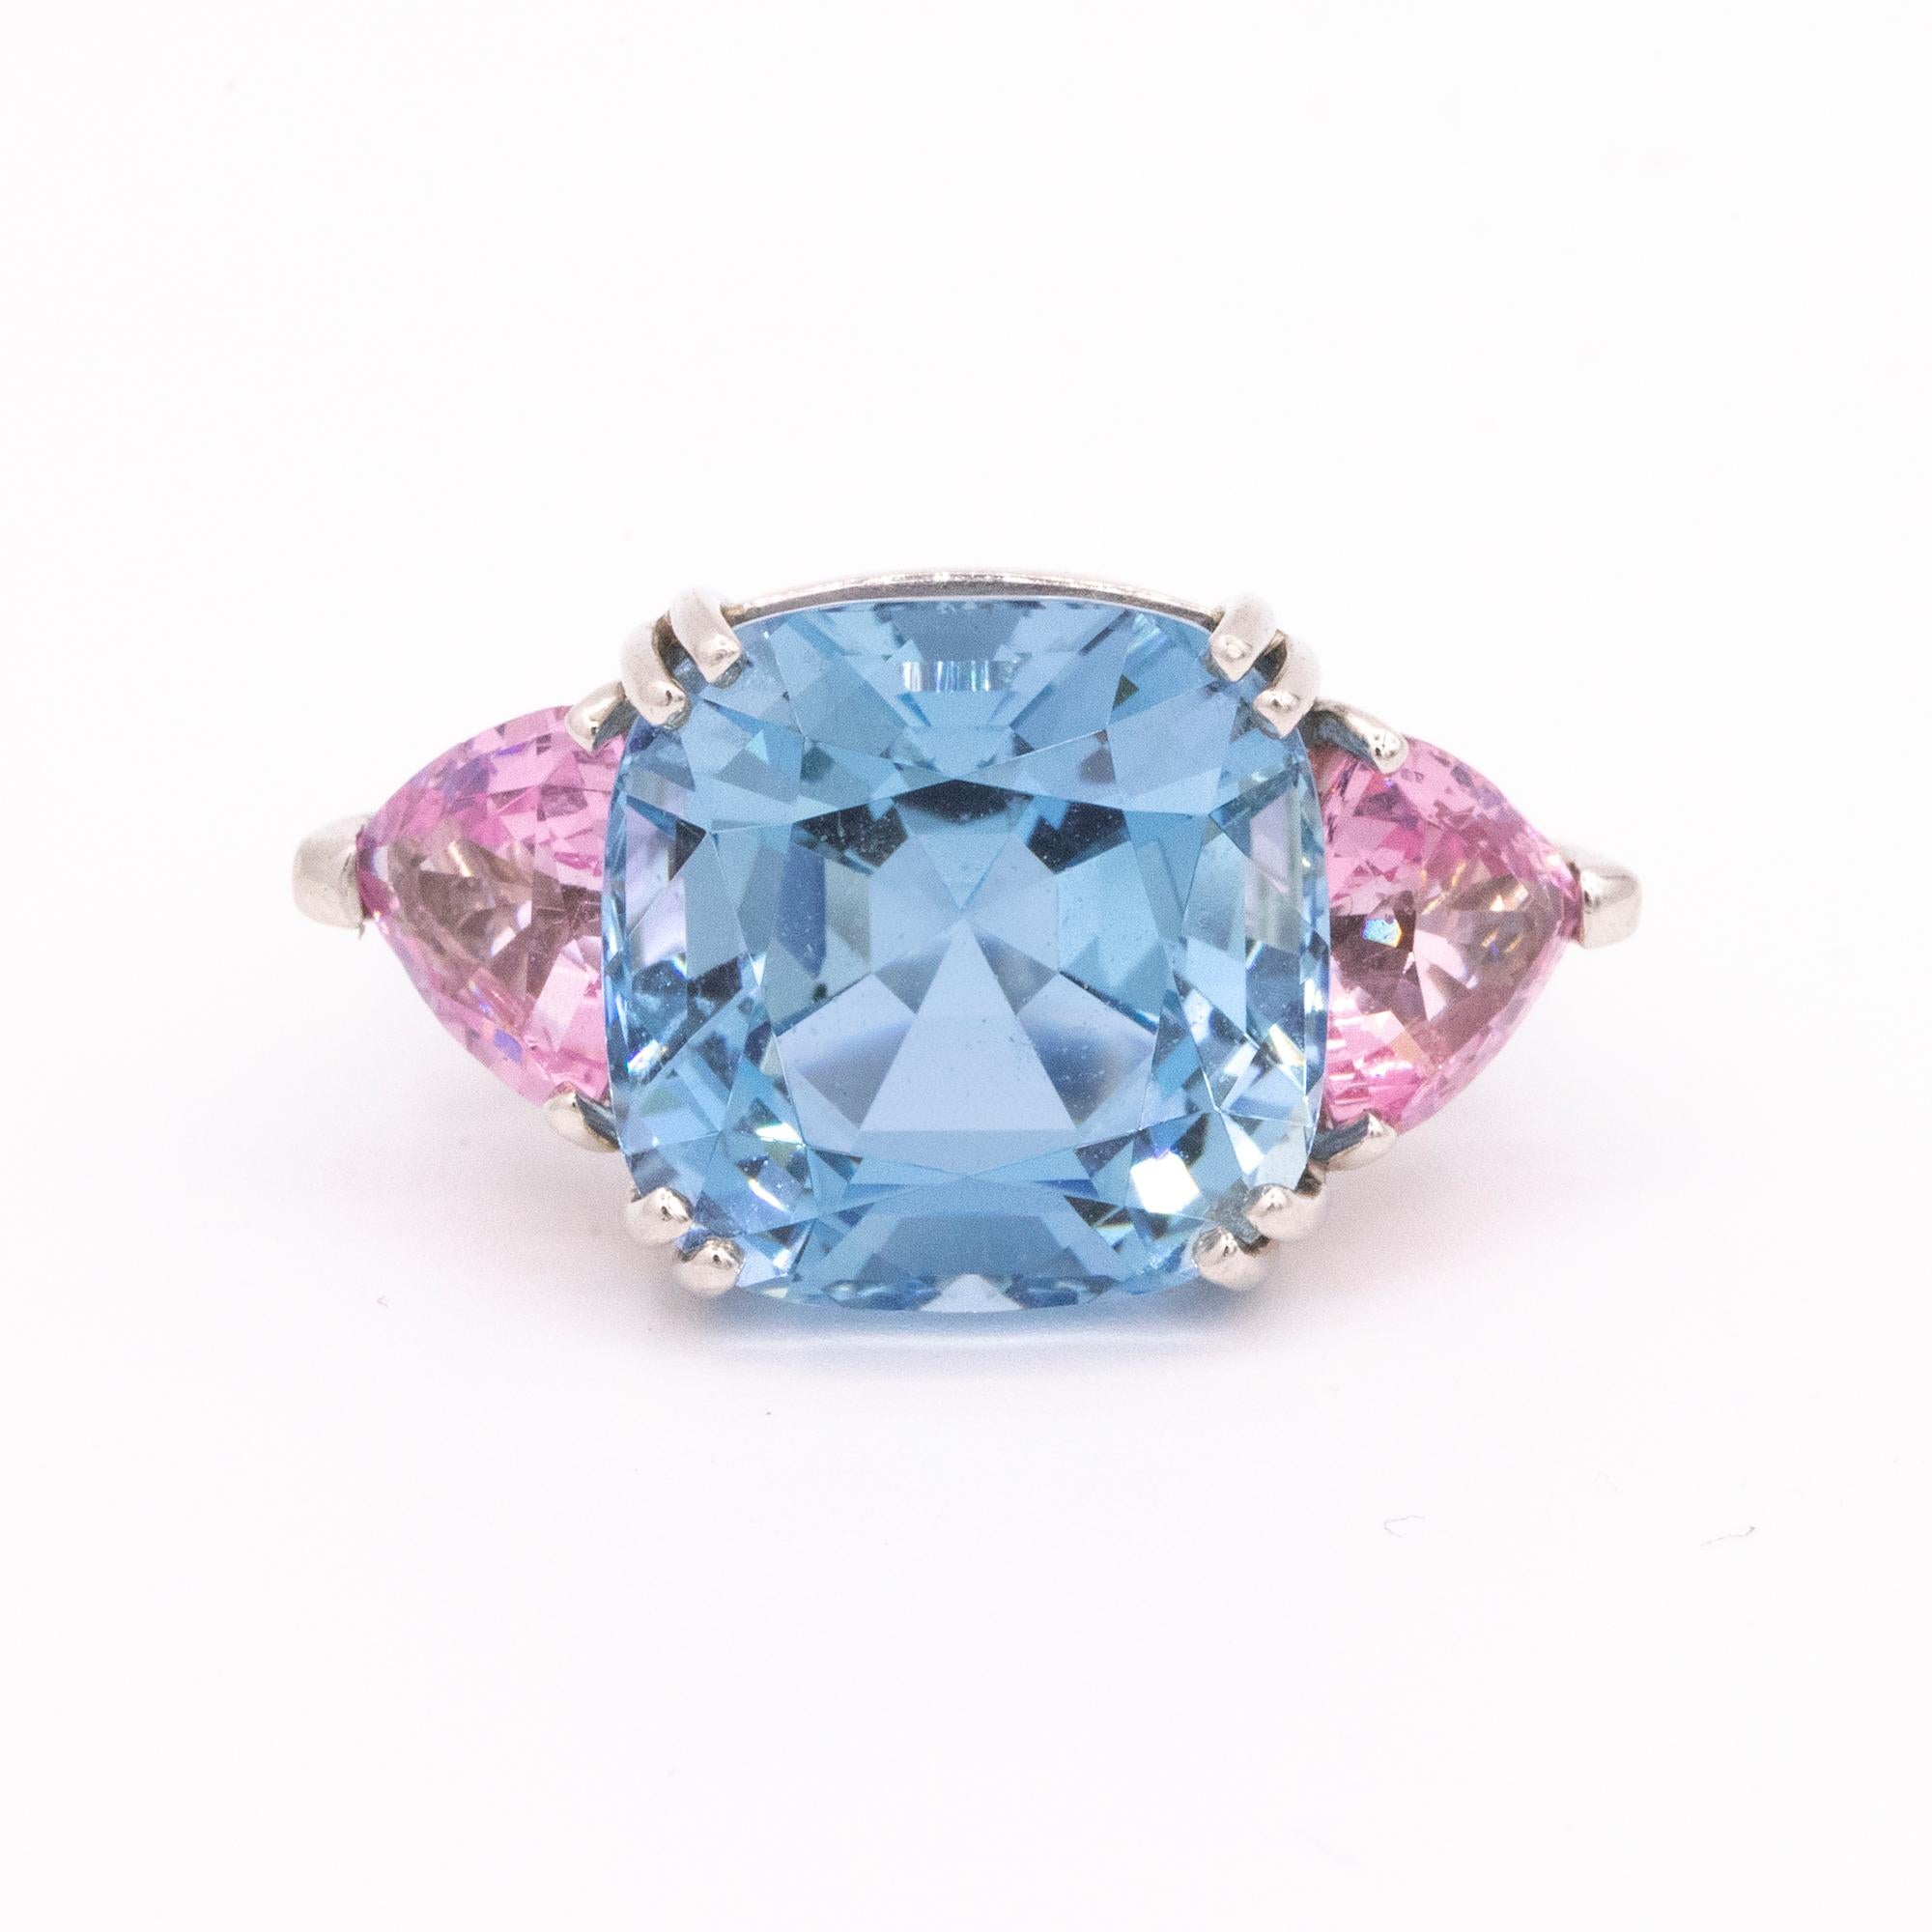 The three-stone ring gets a candy-colored makeover, thanks to a 12-carat cushion-cut ocean-blue aquamarine and over three-carats of lush pink spinels. There is something feminine and fun about choosing a ring like this, with its outsize gumball